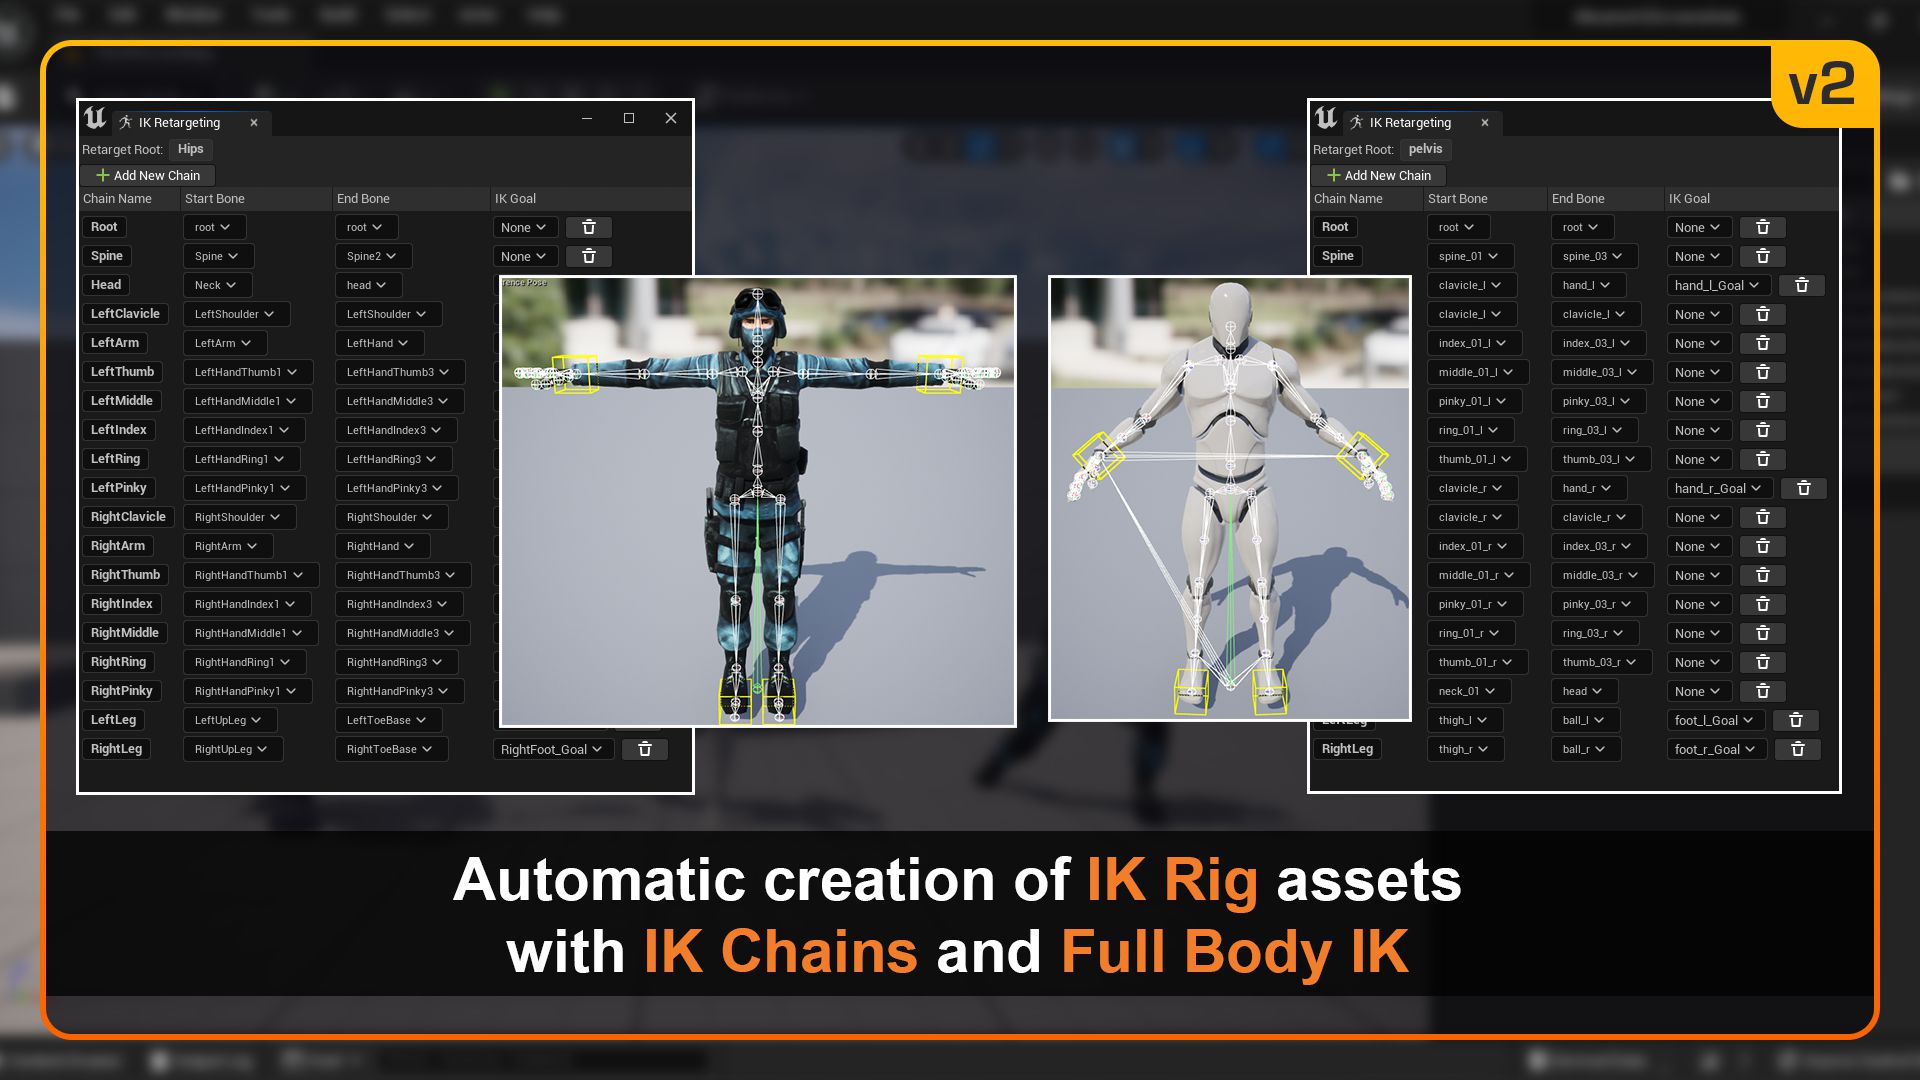 Automatic creation of IK Rig assets with IK Chains and Full Body IK